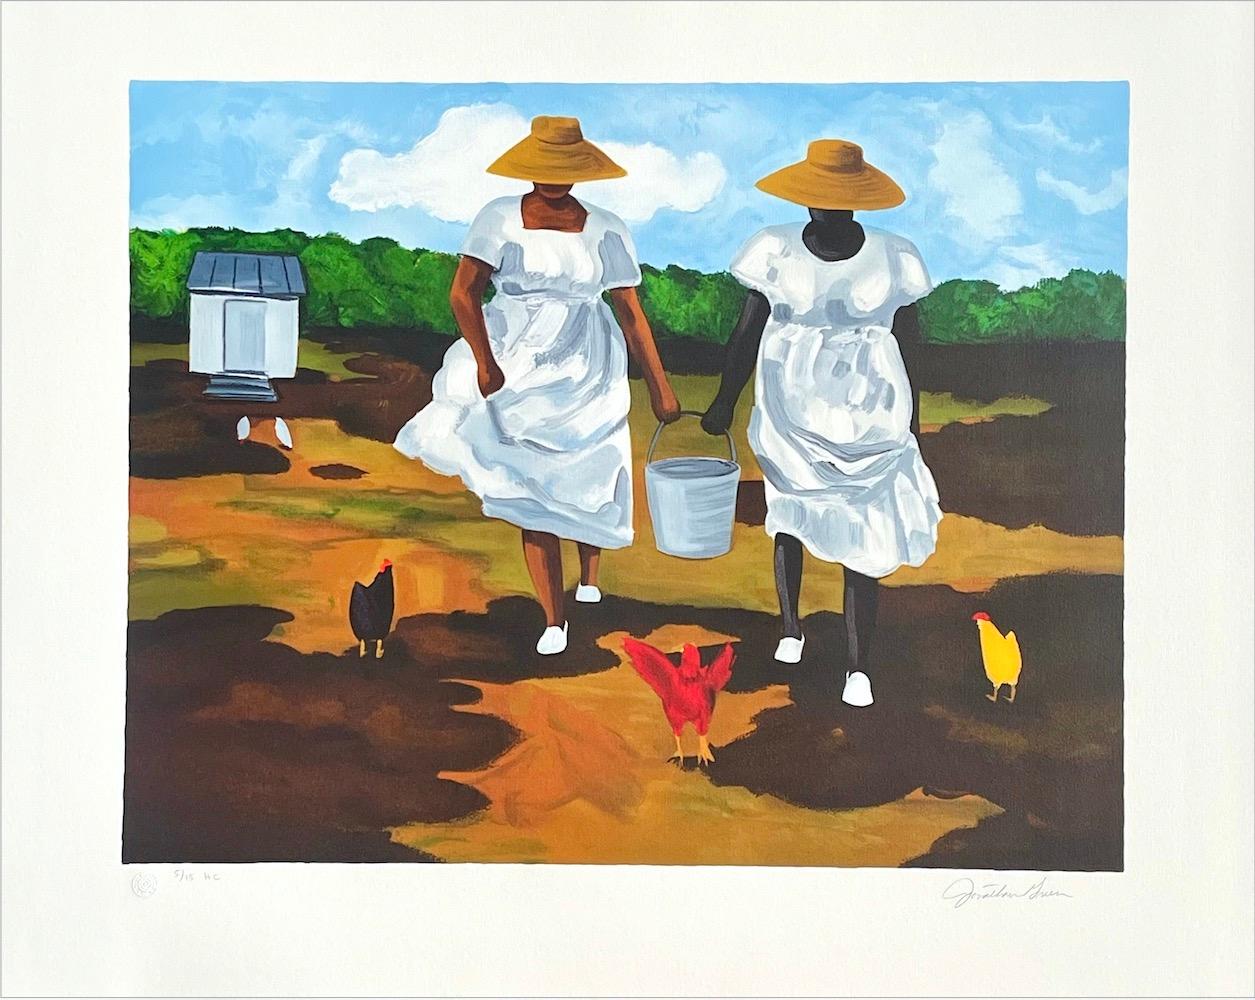 Jonathan Green Animal Print - SHARING THE CHORES Signed Lithograph, Two Women Feeding Chickens, Gullah Culture